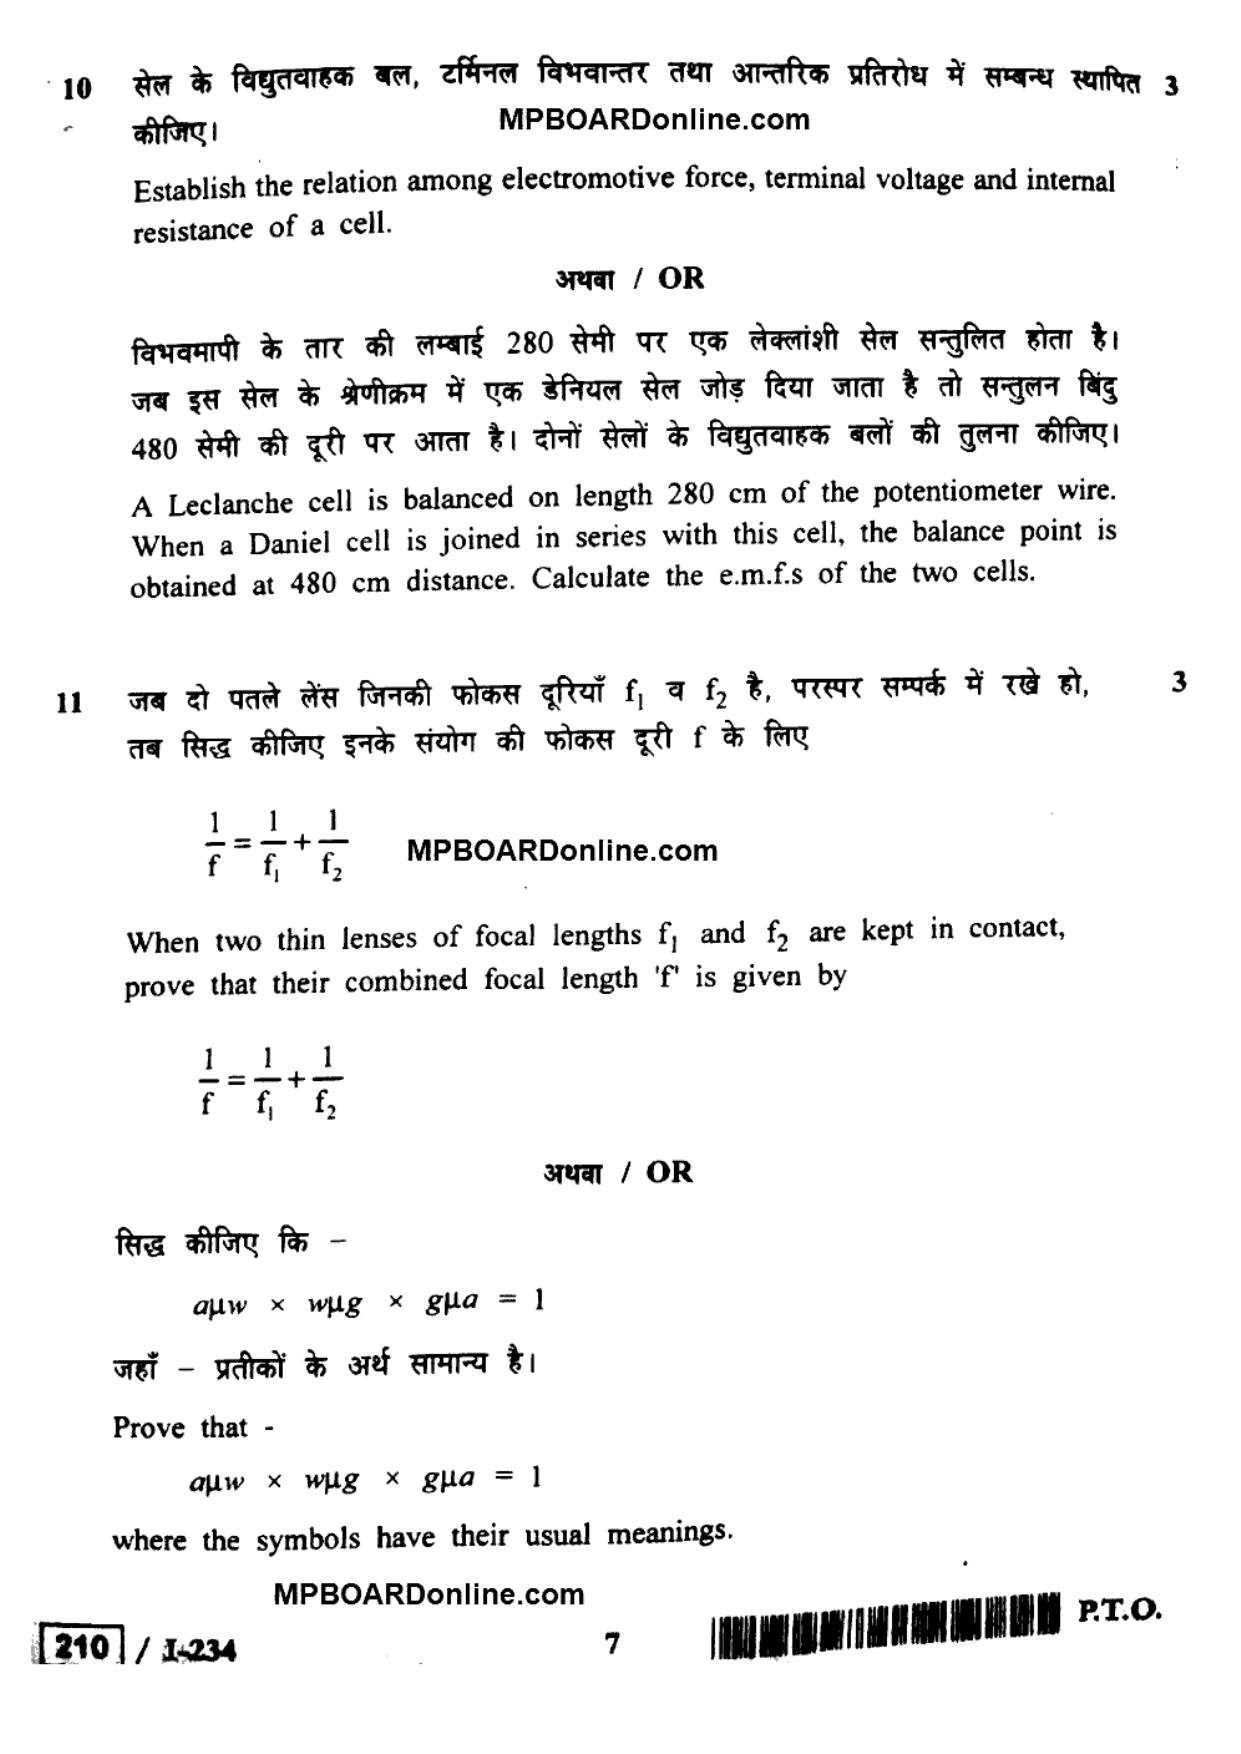 MP Board Class 12 Physics 2018 Question Paper - Page 7